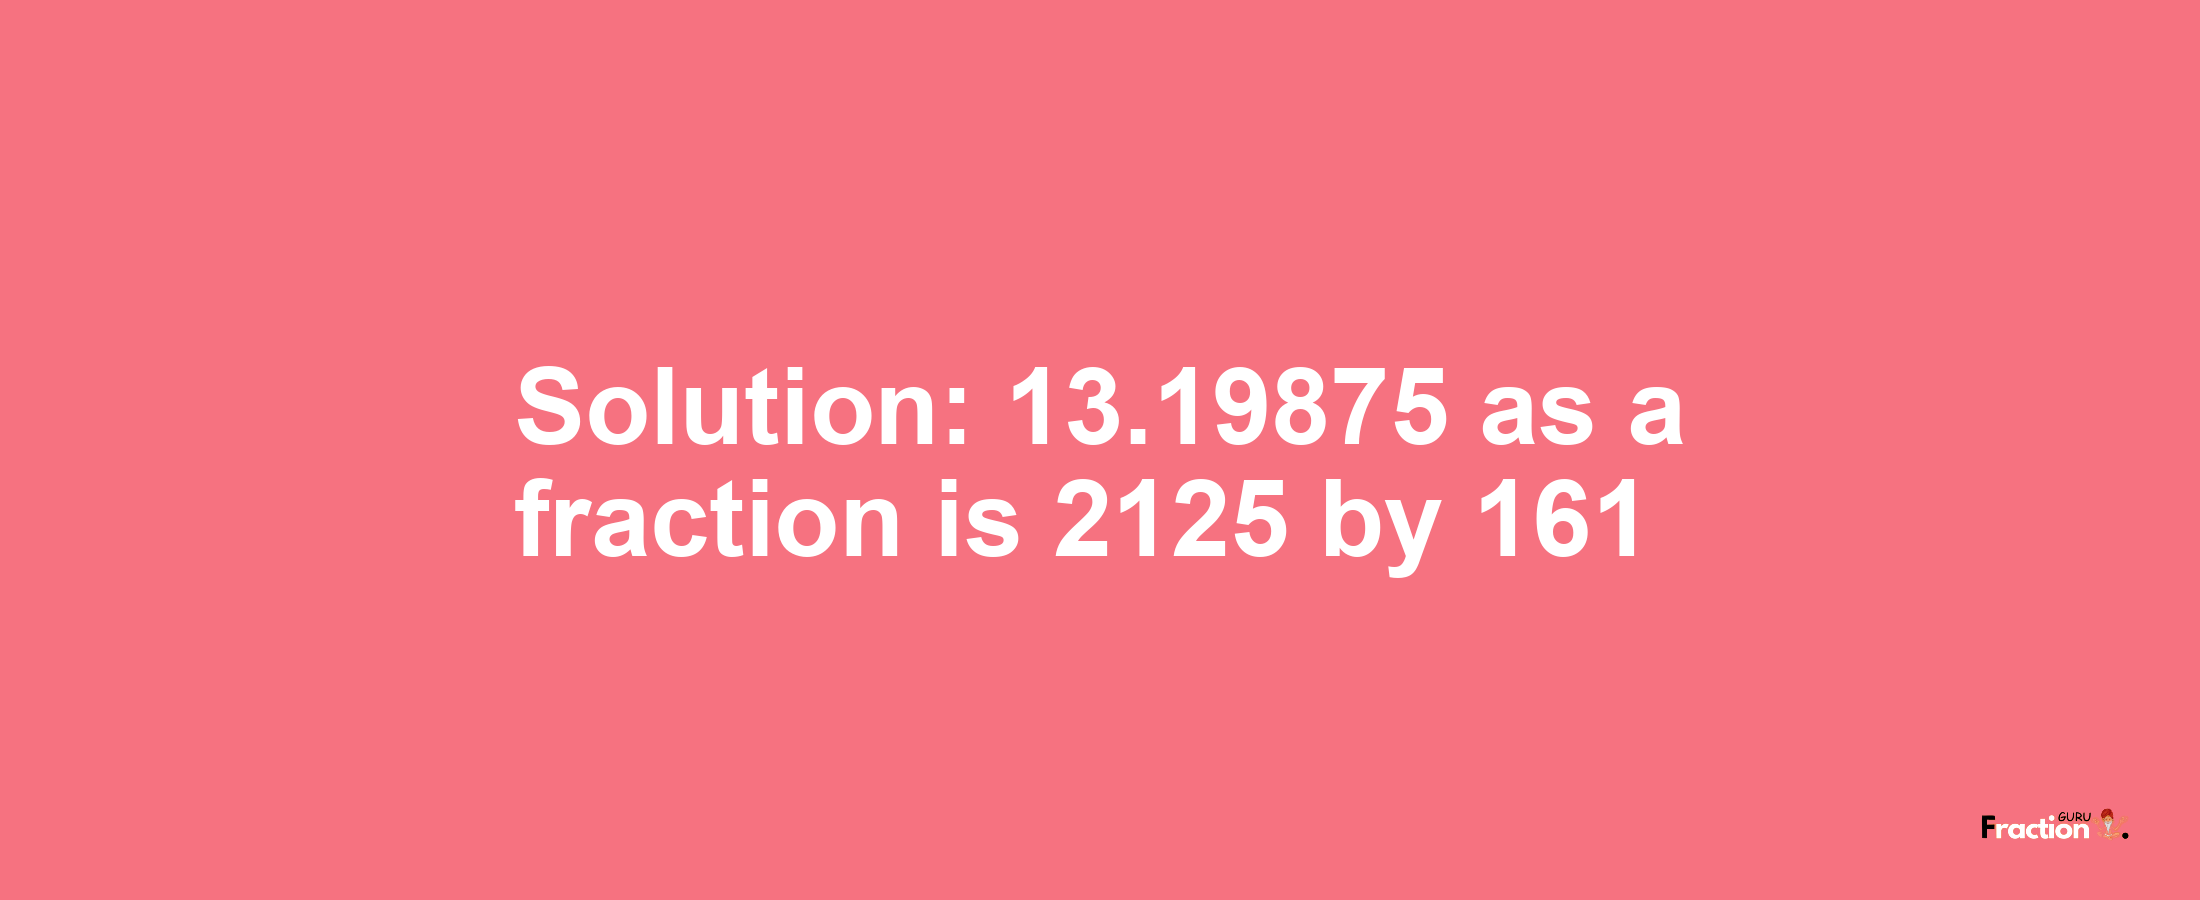 Solution:13.19875 as a fraction is 2125/161